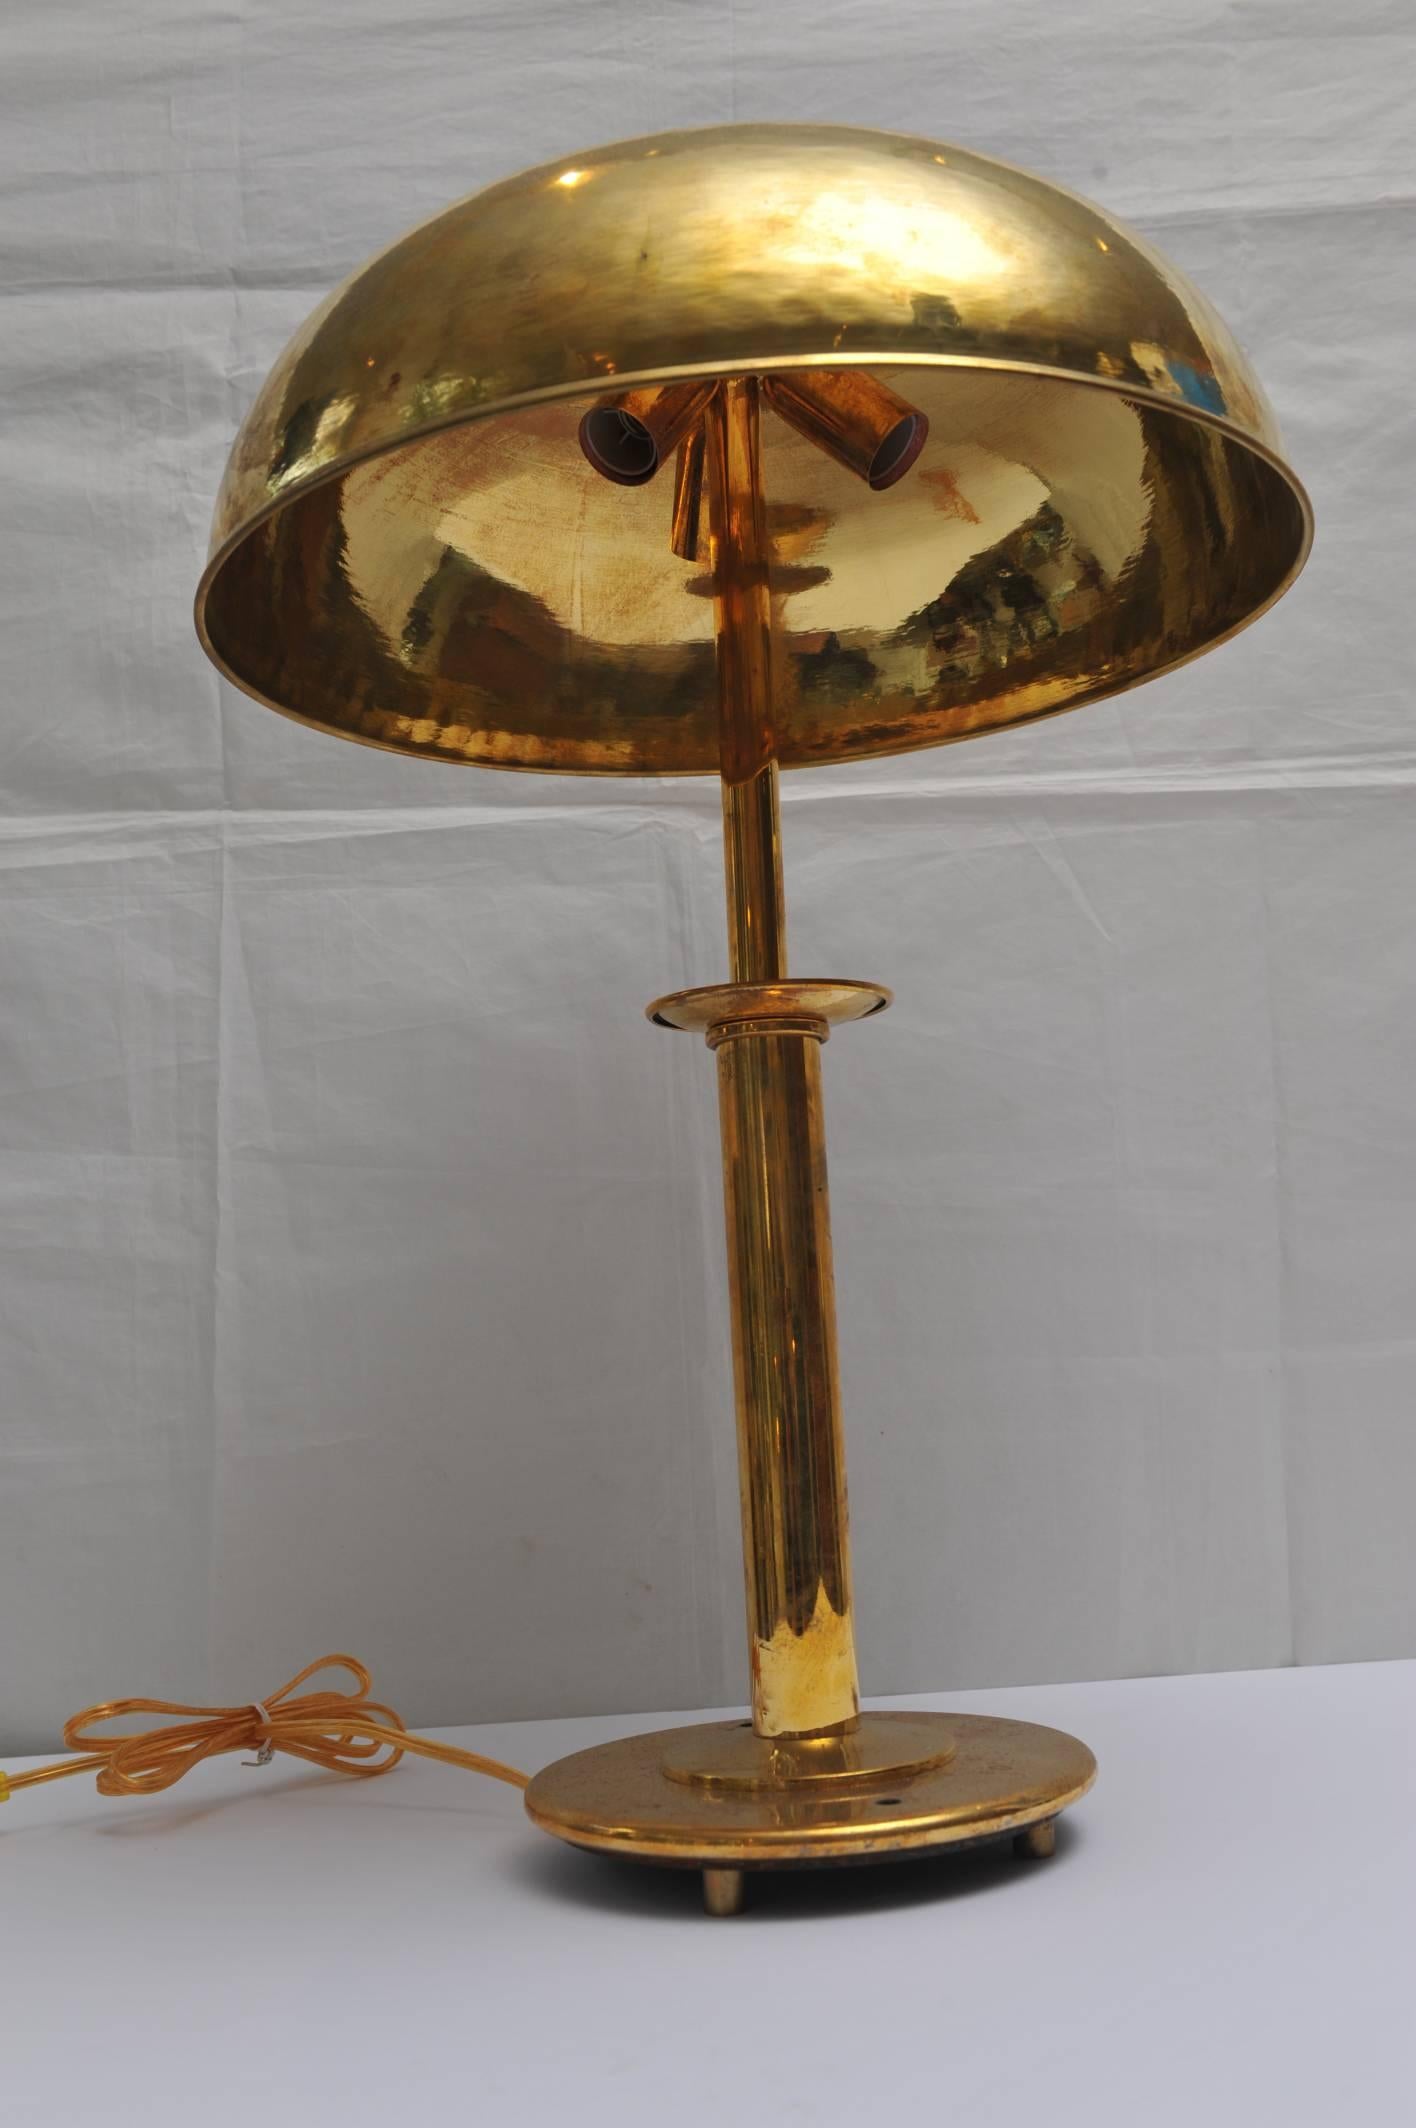 Pair of brass table lamps with brass dome shades from the stateroom of a Mid-Century ship. Takes three European (intermediate) bulbs which are easy to get. Rewired however, for American use. The base has a 7" diameter and just the shade is